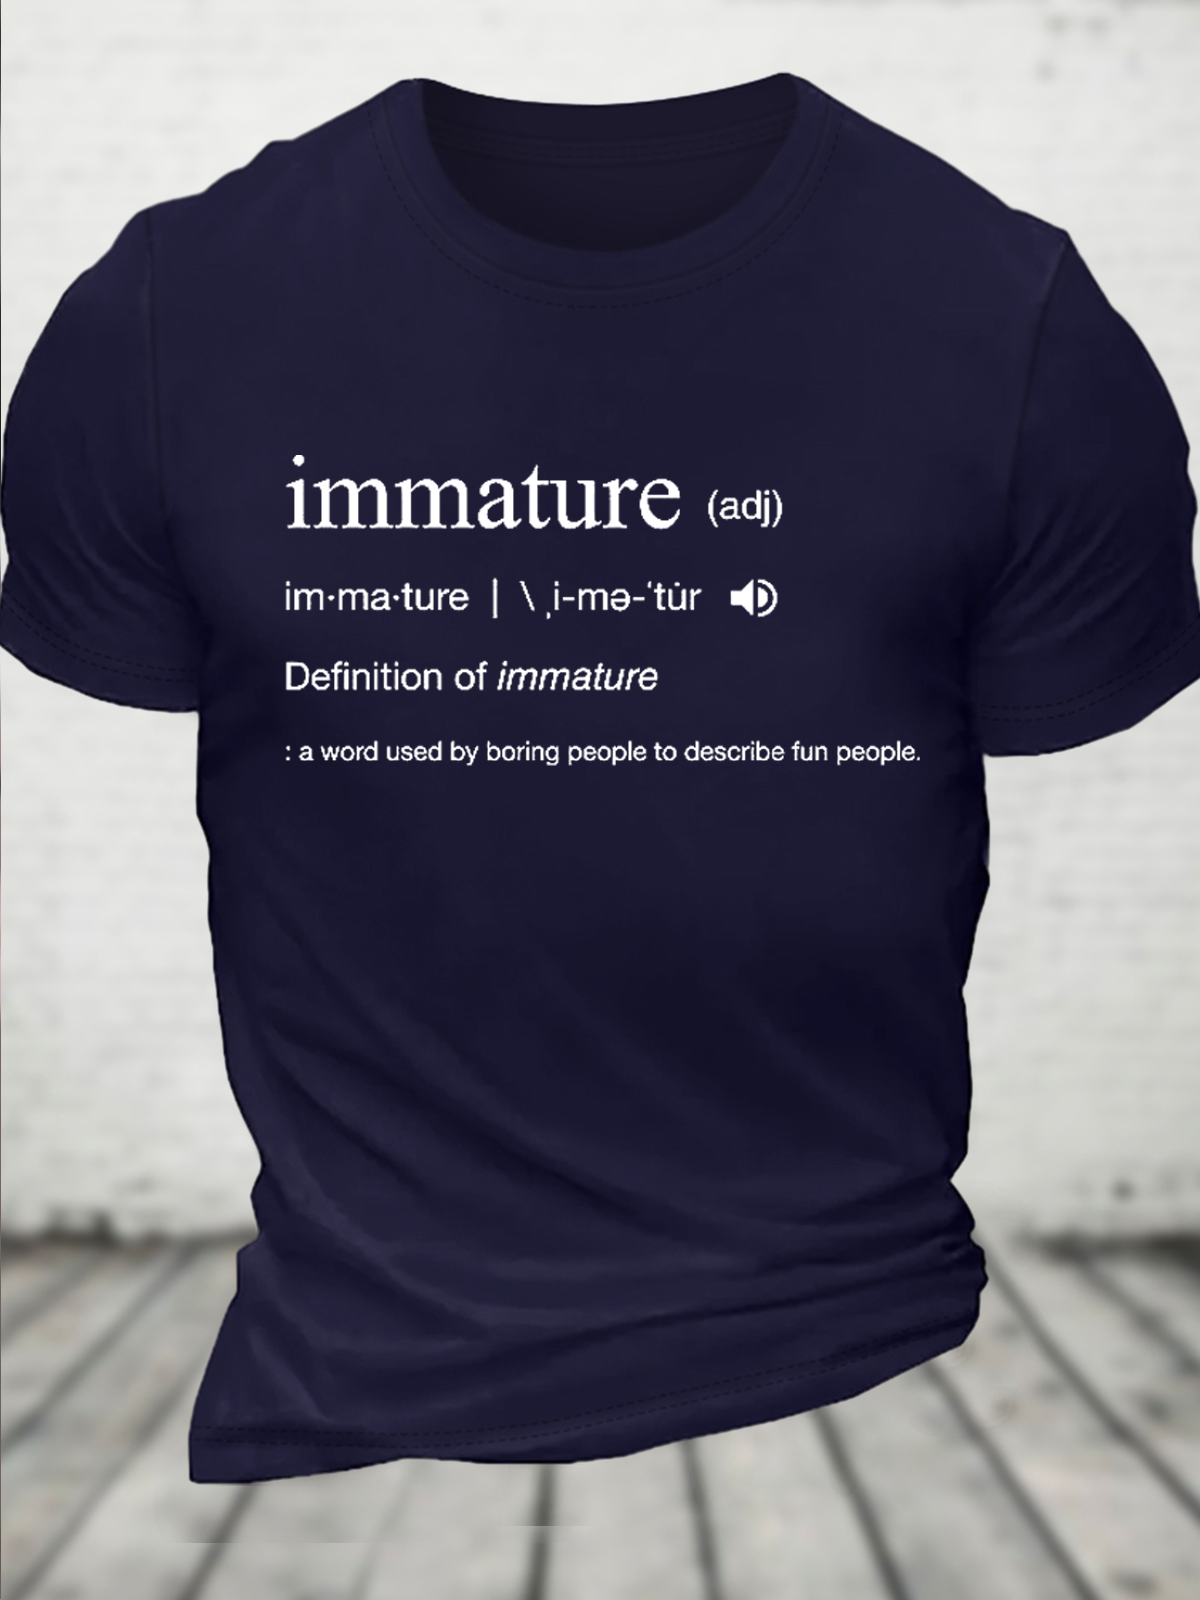 Cotton Immature Dictionary Definition Text Letters Casual T-Shirt